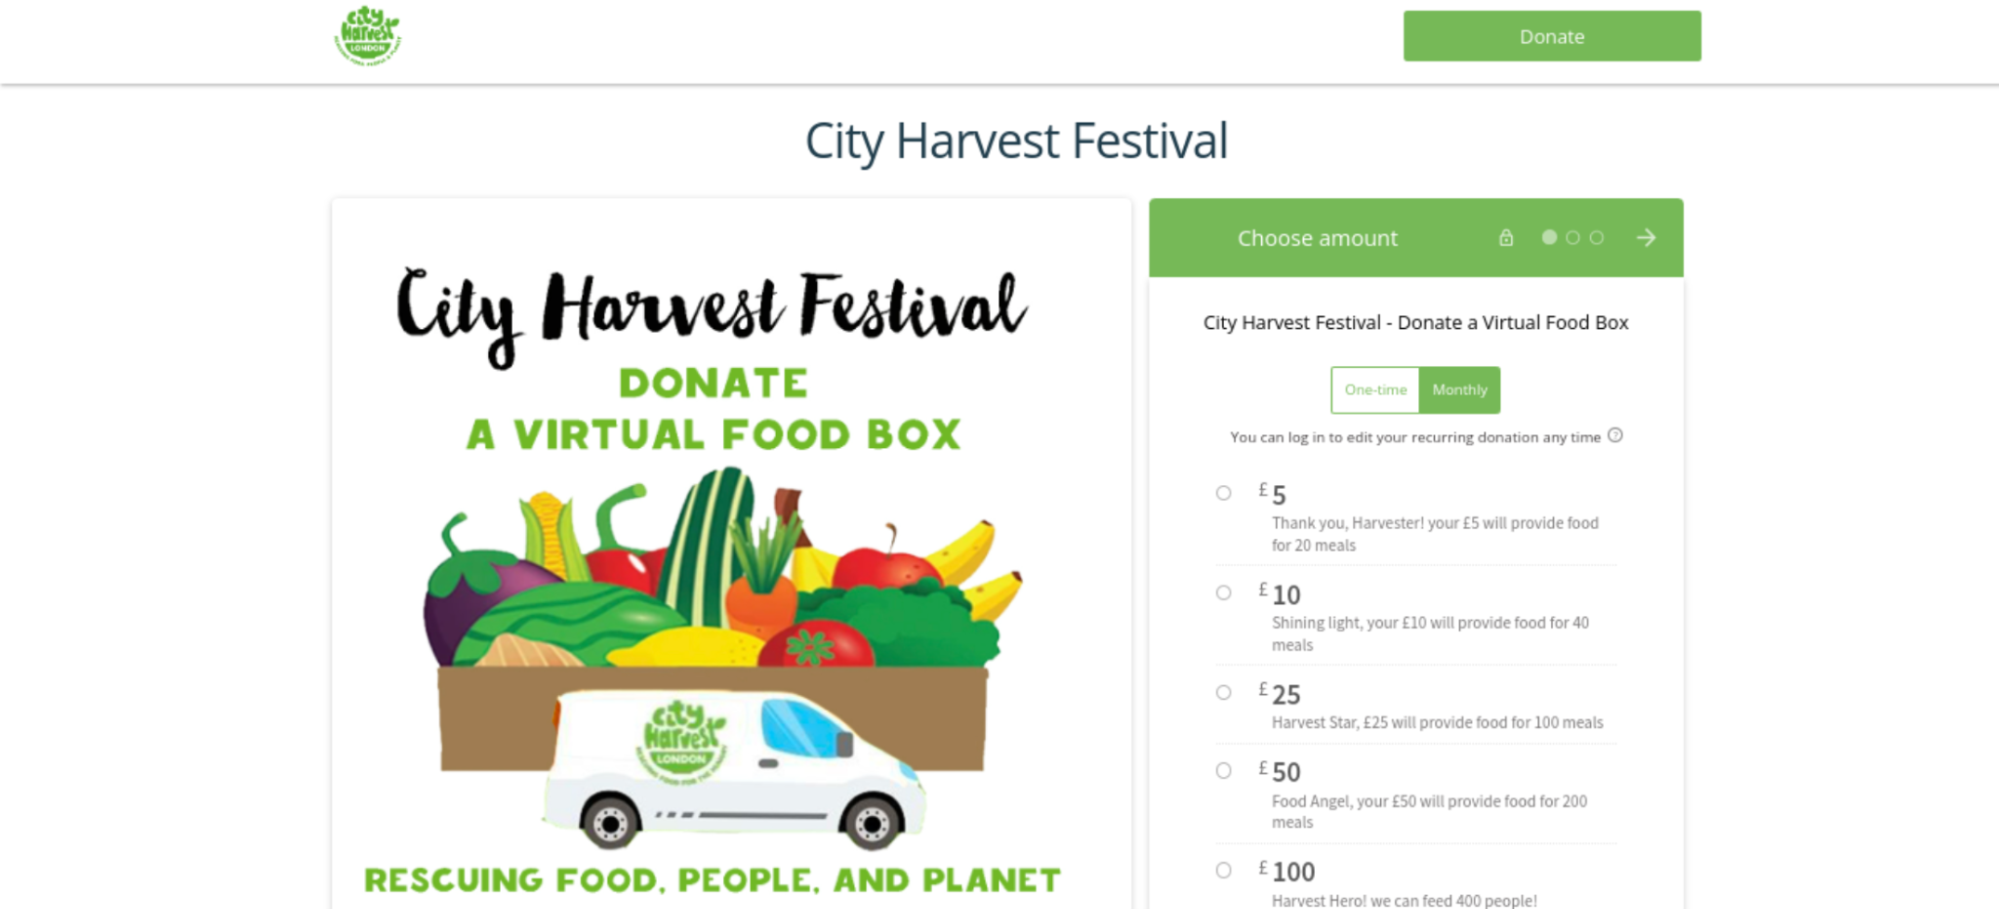 City Harvest's Donorbox fundraising page for their fall festival event